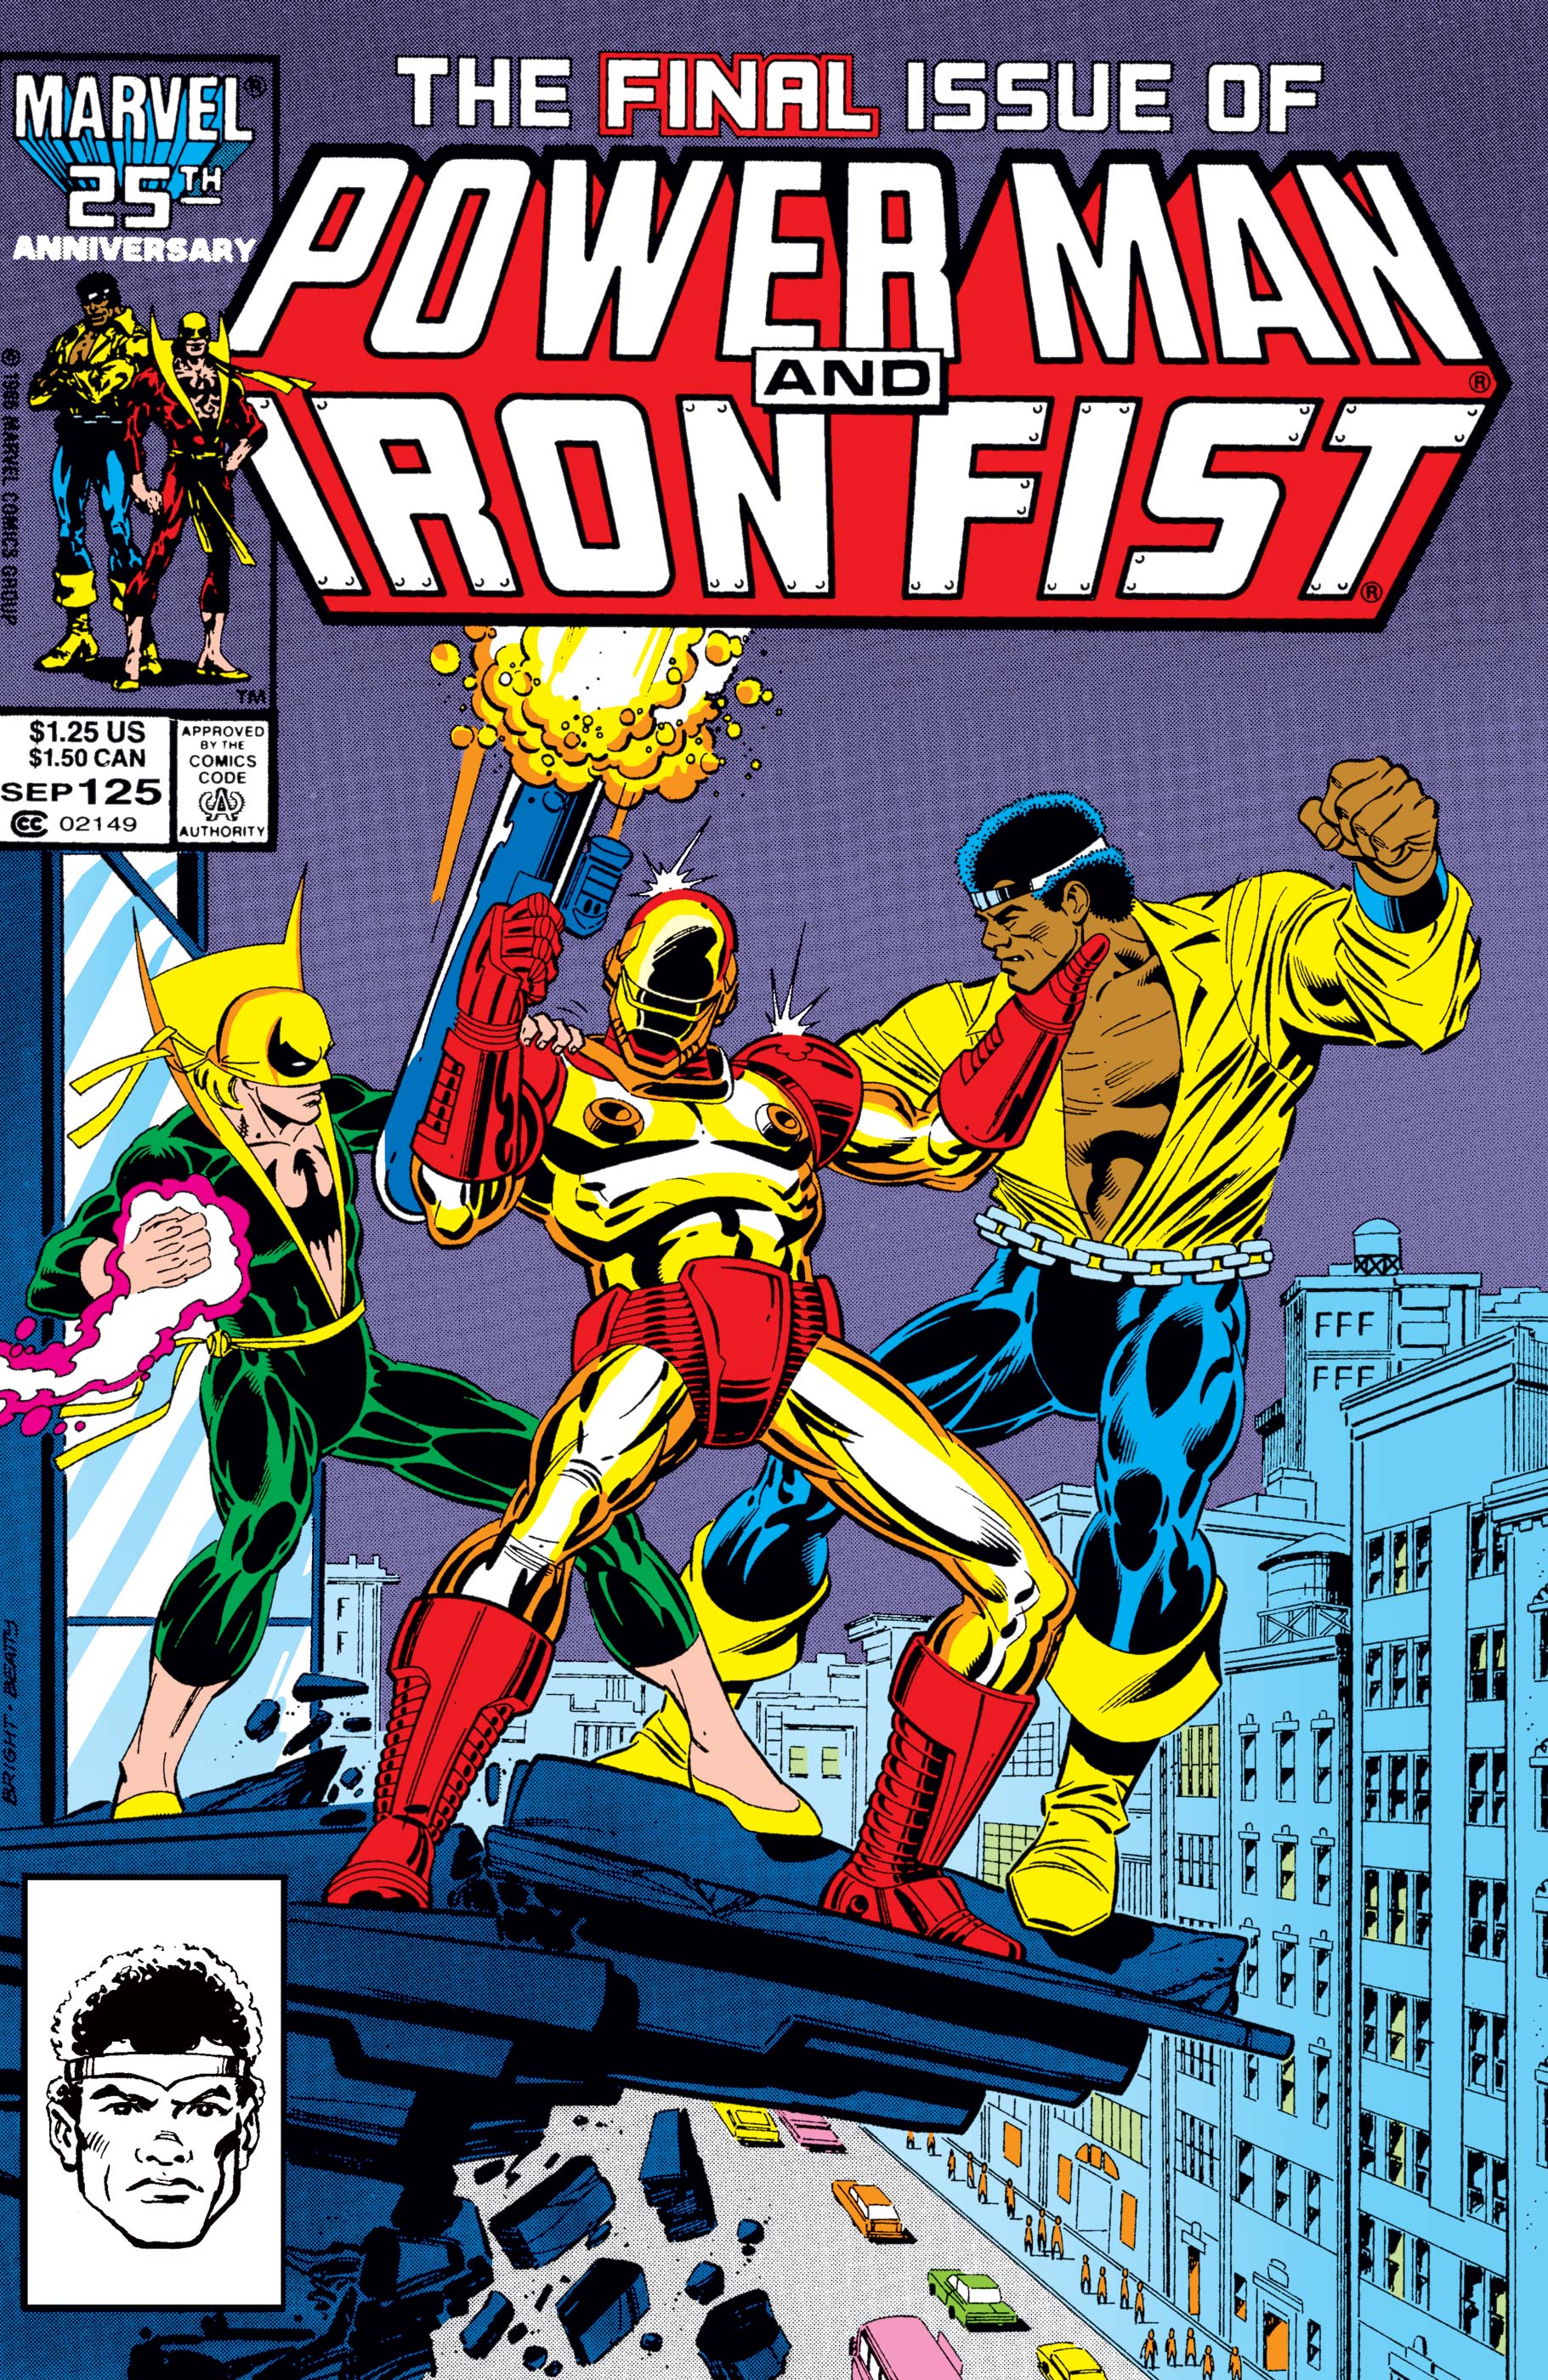 Power Man and Iron Fist (1978) #125